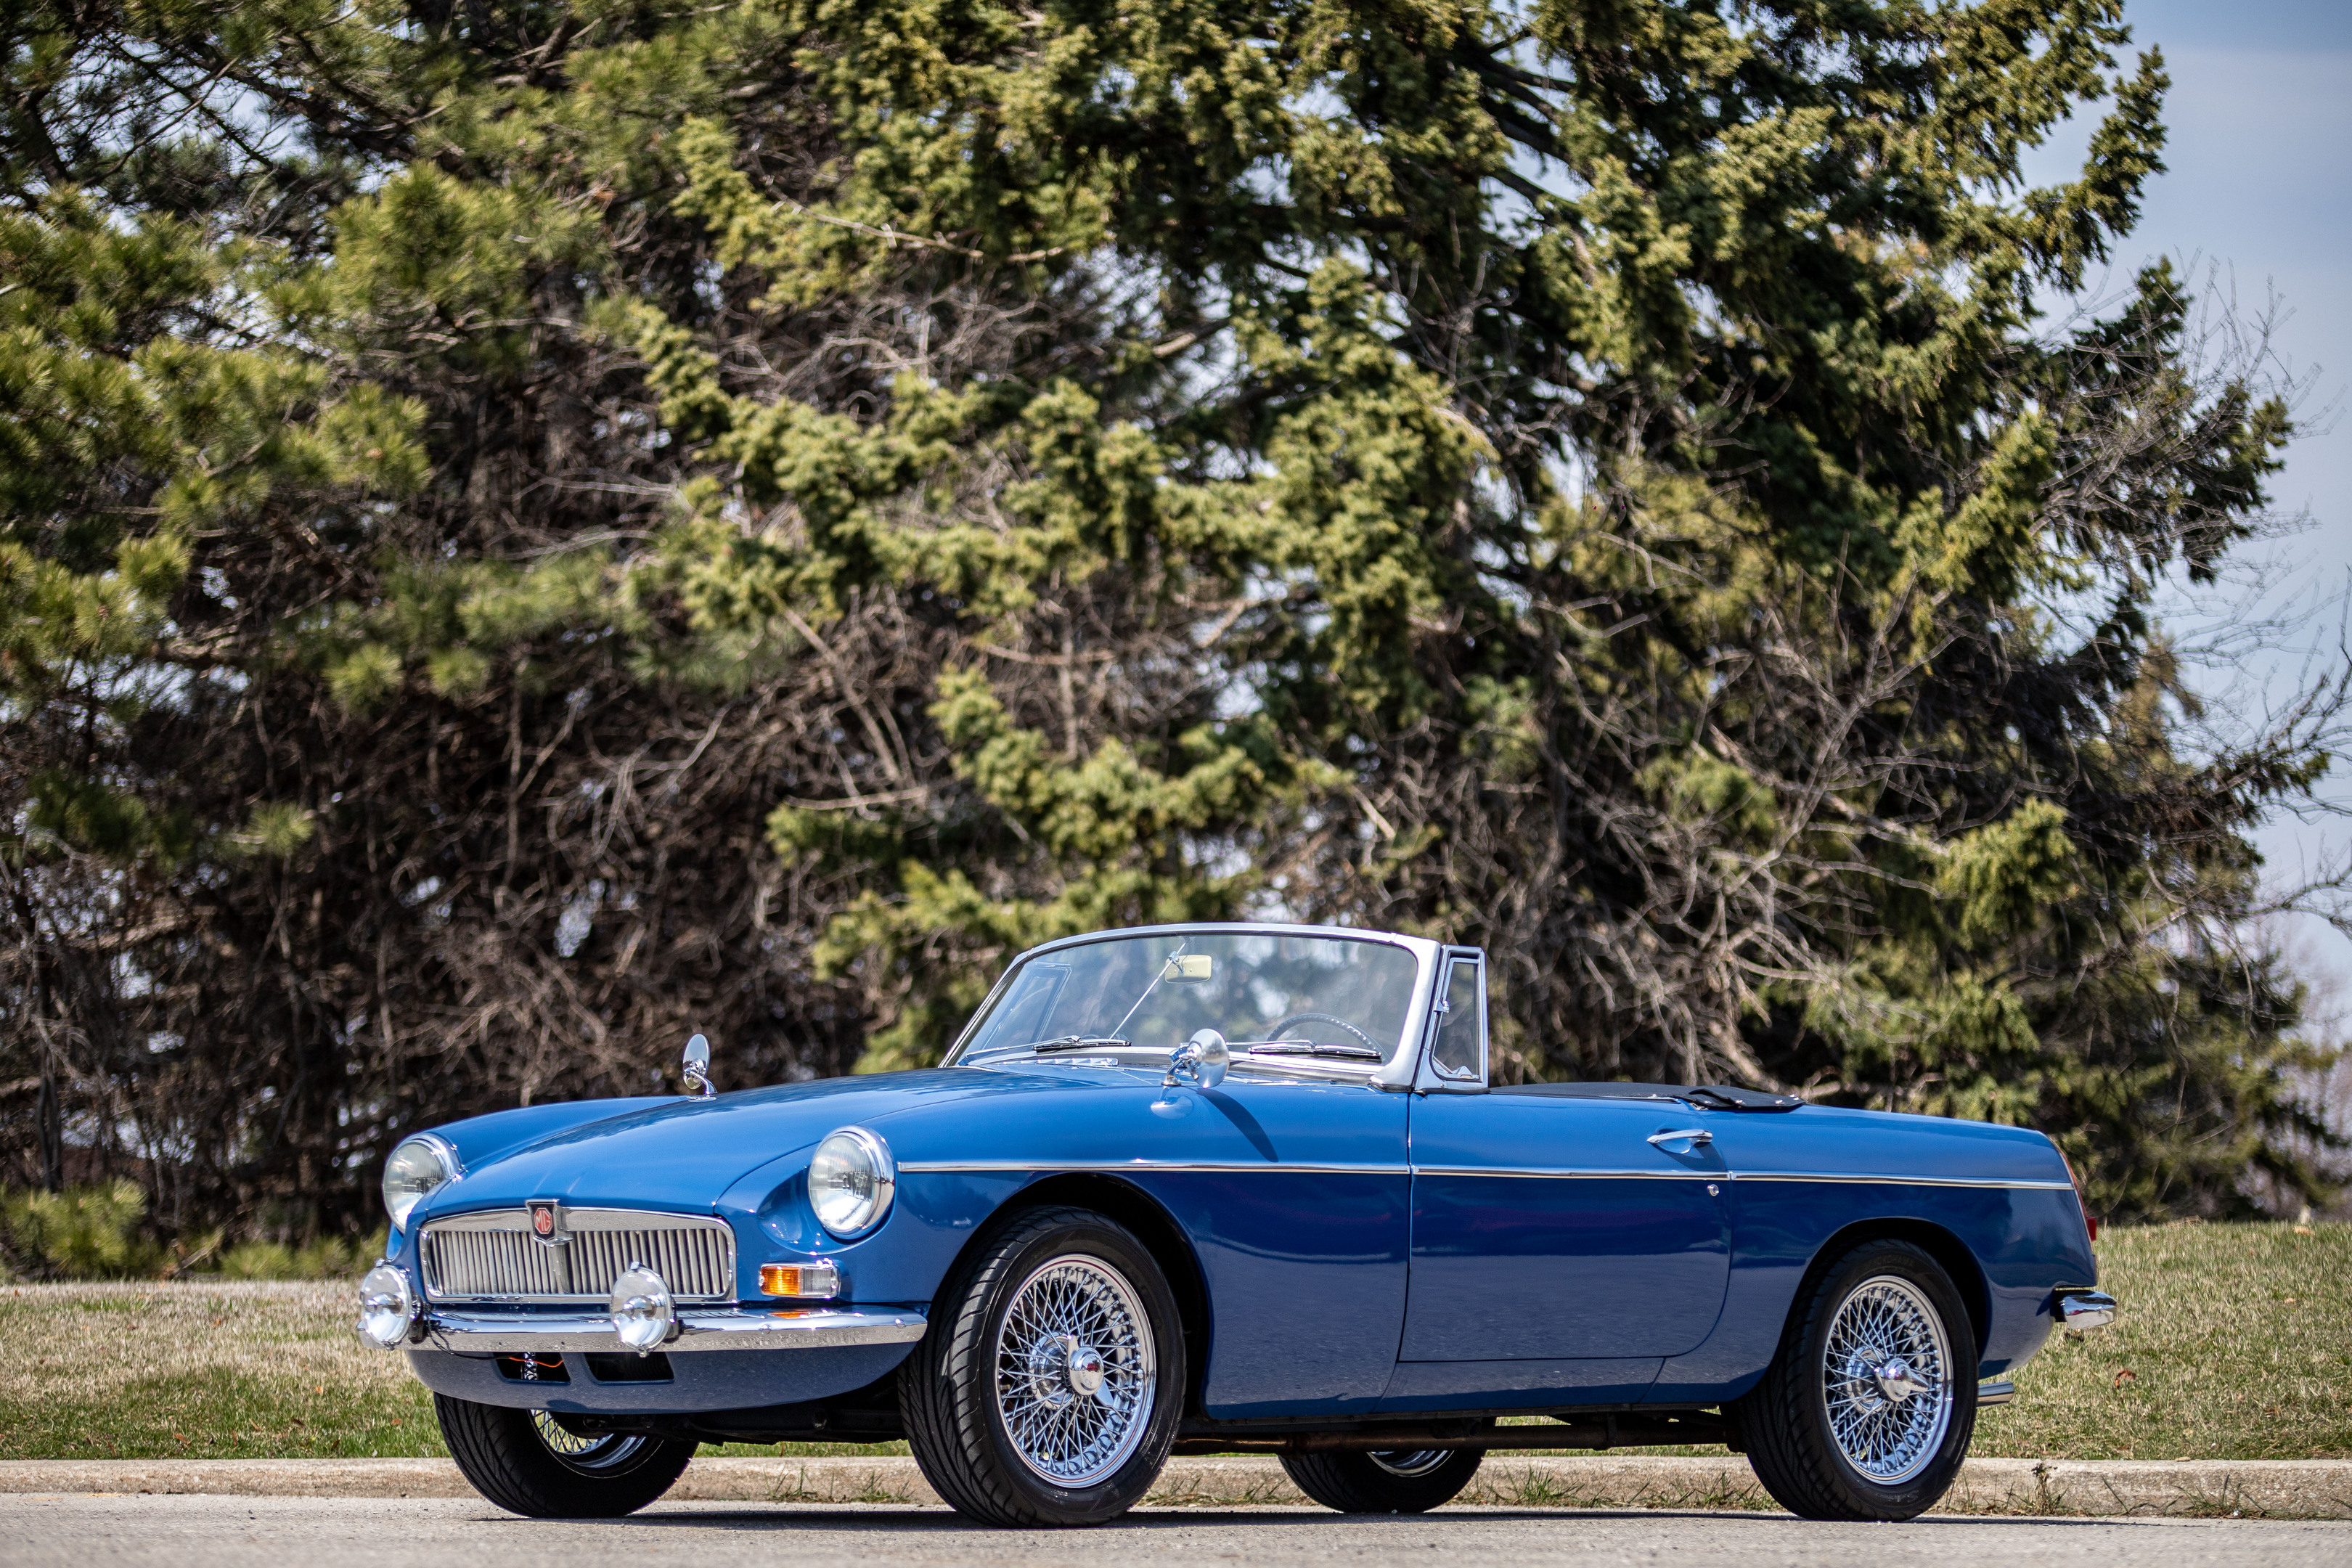 1967 MG MGB Mark 1, 5 speed, $95,000 in restoration invoices